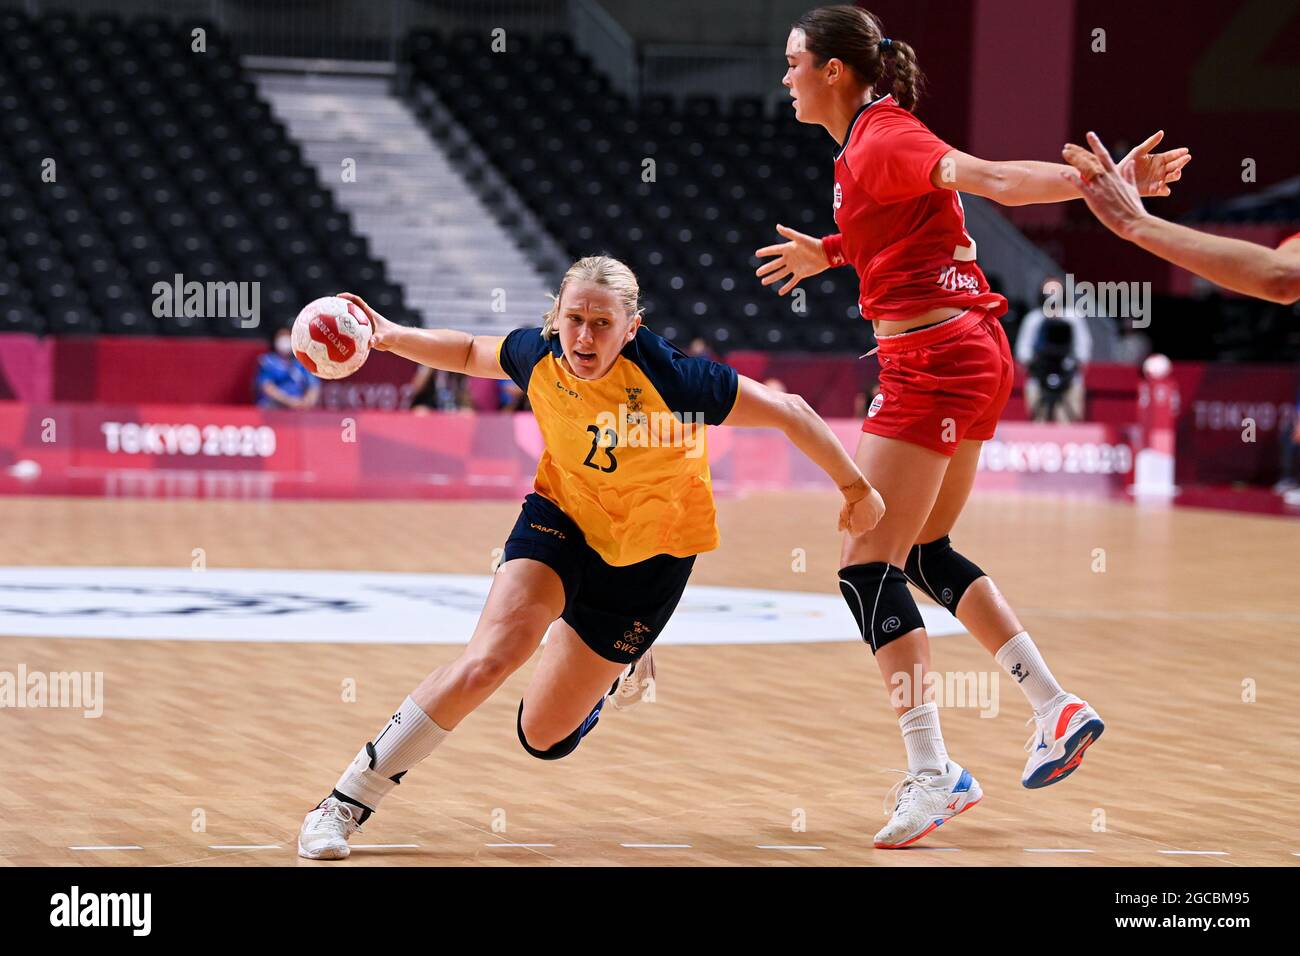 Tokyo, Japan. 8th Aug, 2021. Emma Lindqvist (L) of Sweden competes during the women's handball bronze medal match between Norway and Sweden at Tokyo 2020 Olympic Games in Tokyo, Japan, Aug 8, 2021. Credit: Du Yu/Xinhua/Alamy Live News Stock Photo